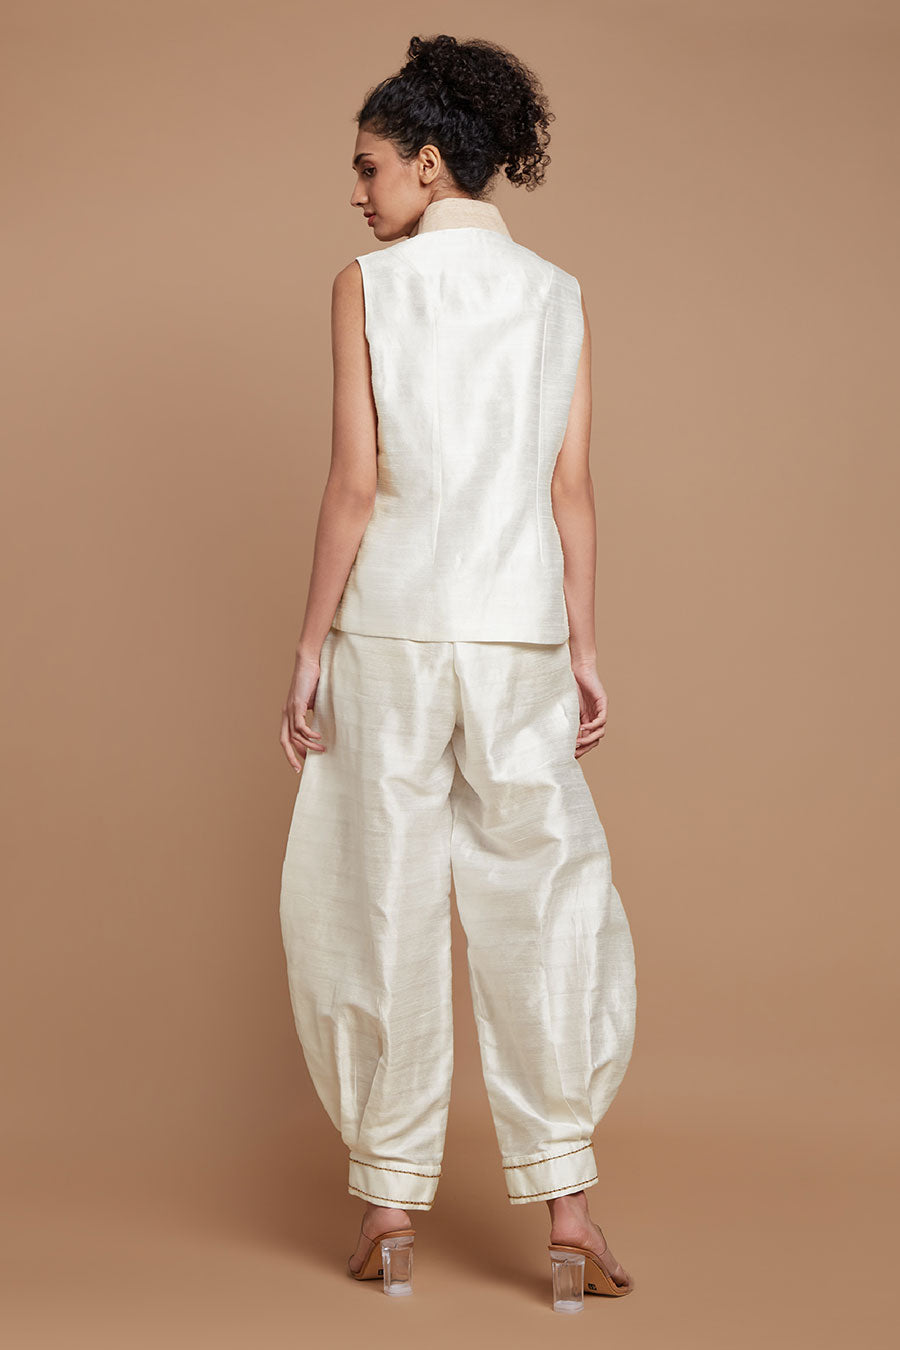 White Embroidered Baggy Pants